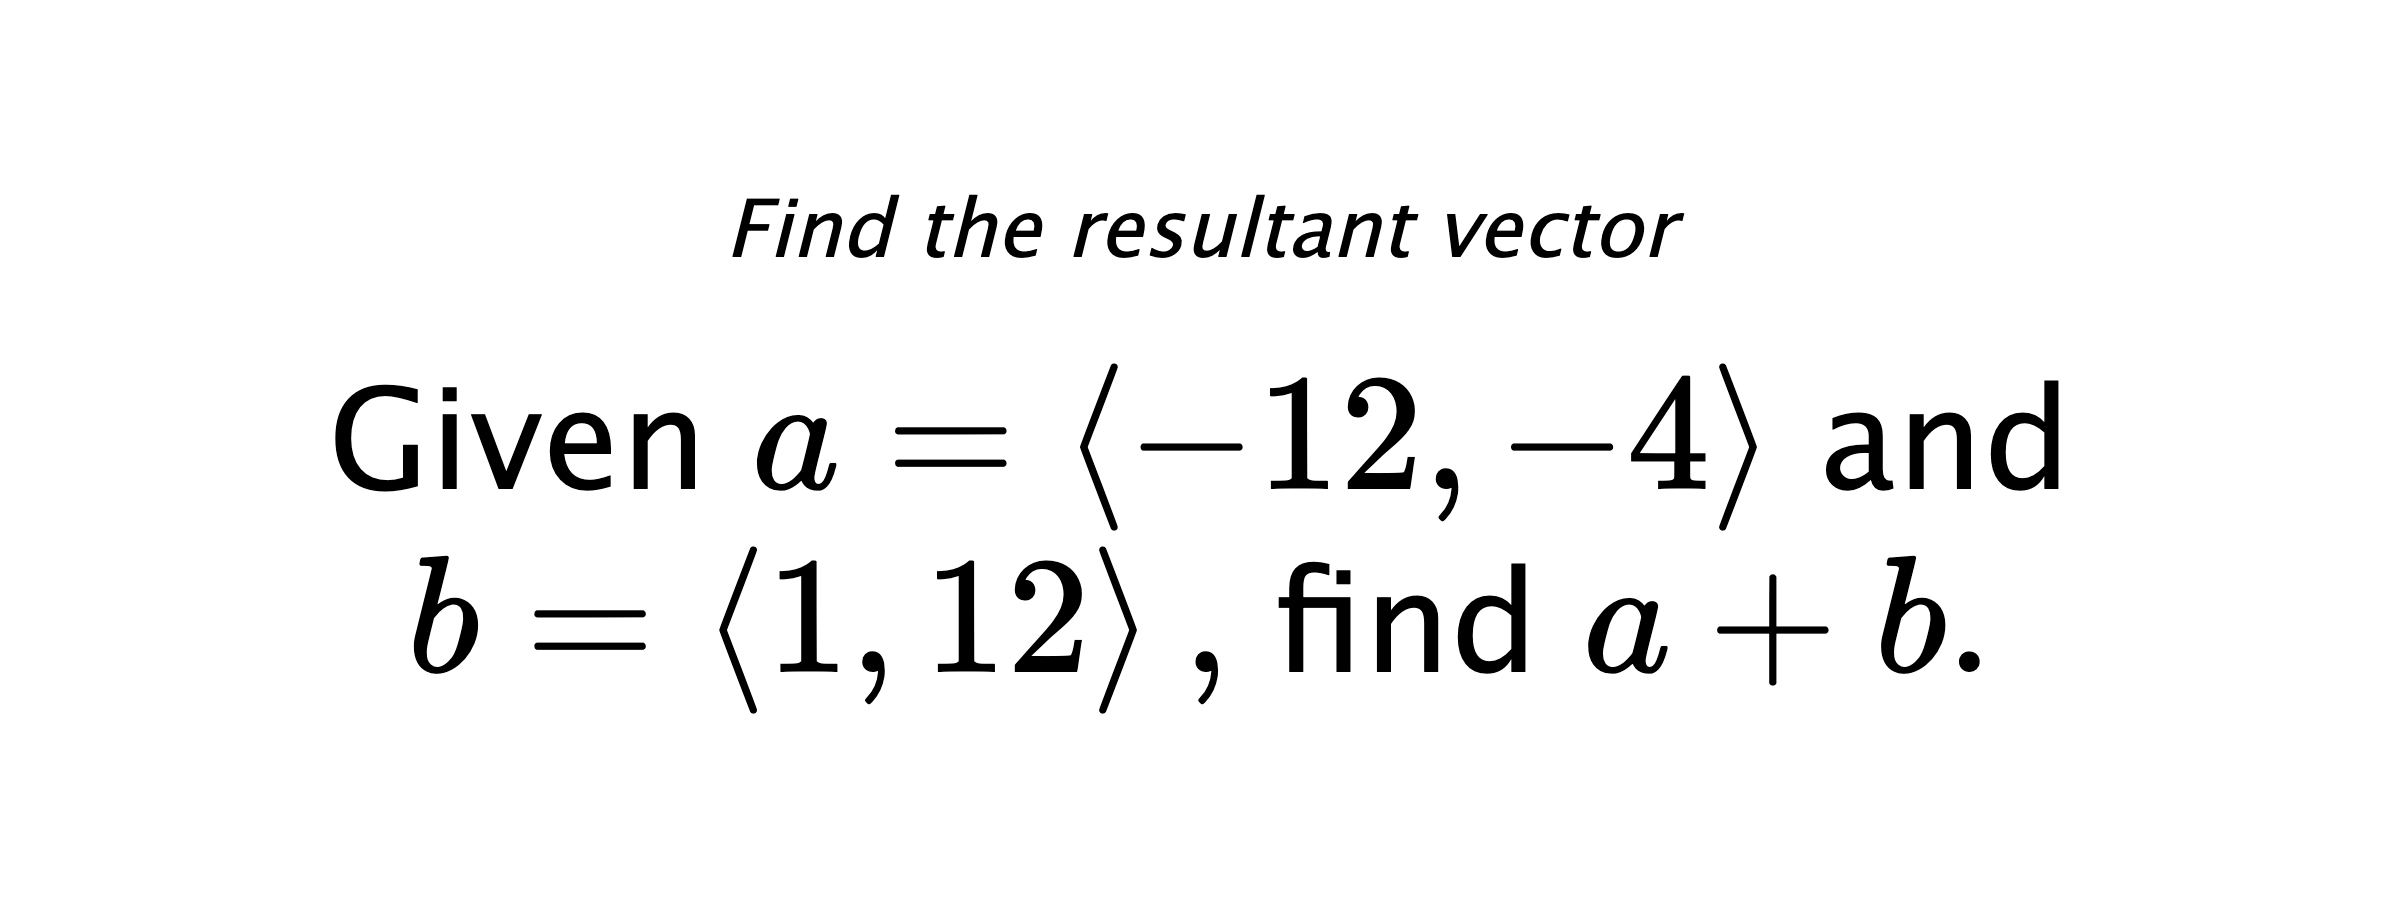 Find the resultant vector Given $ a = \left< -12,-4 \right> $ and $ b = \left< 1,12 \right> ,$ find $ a+b .$